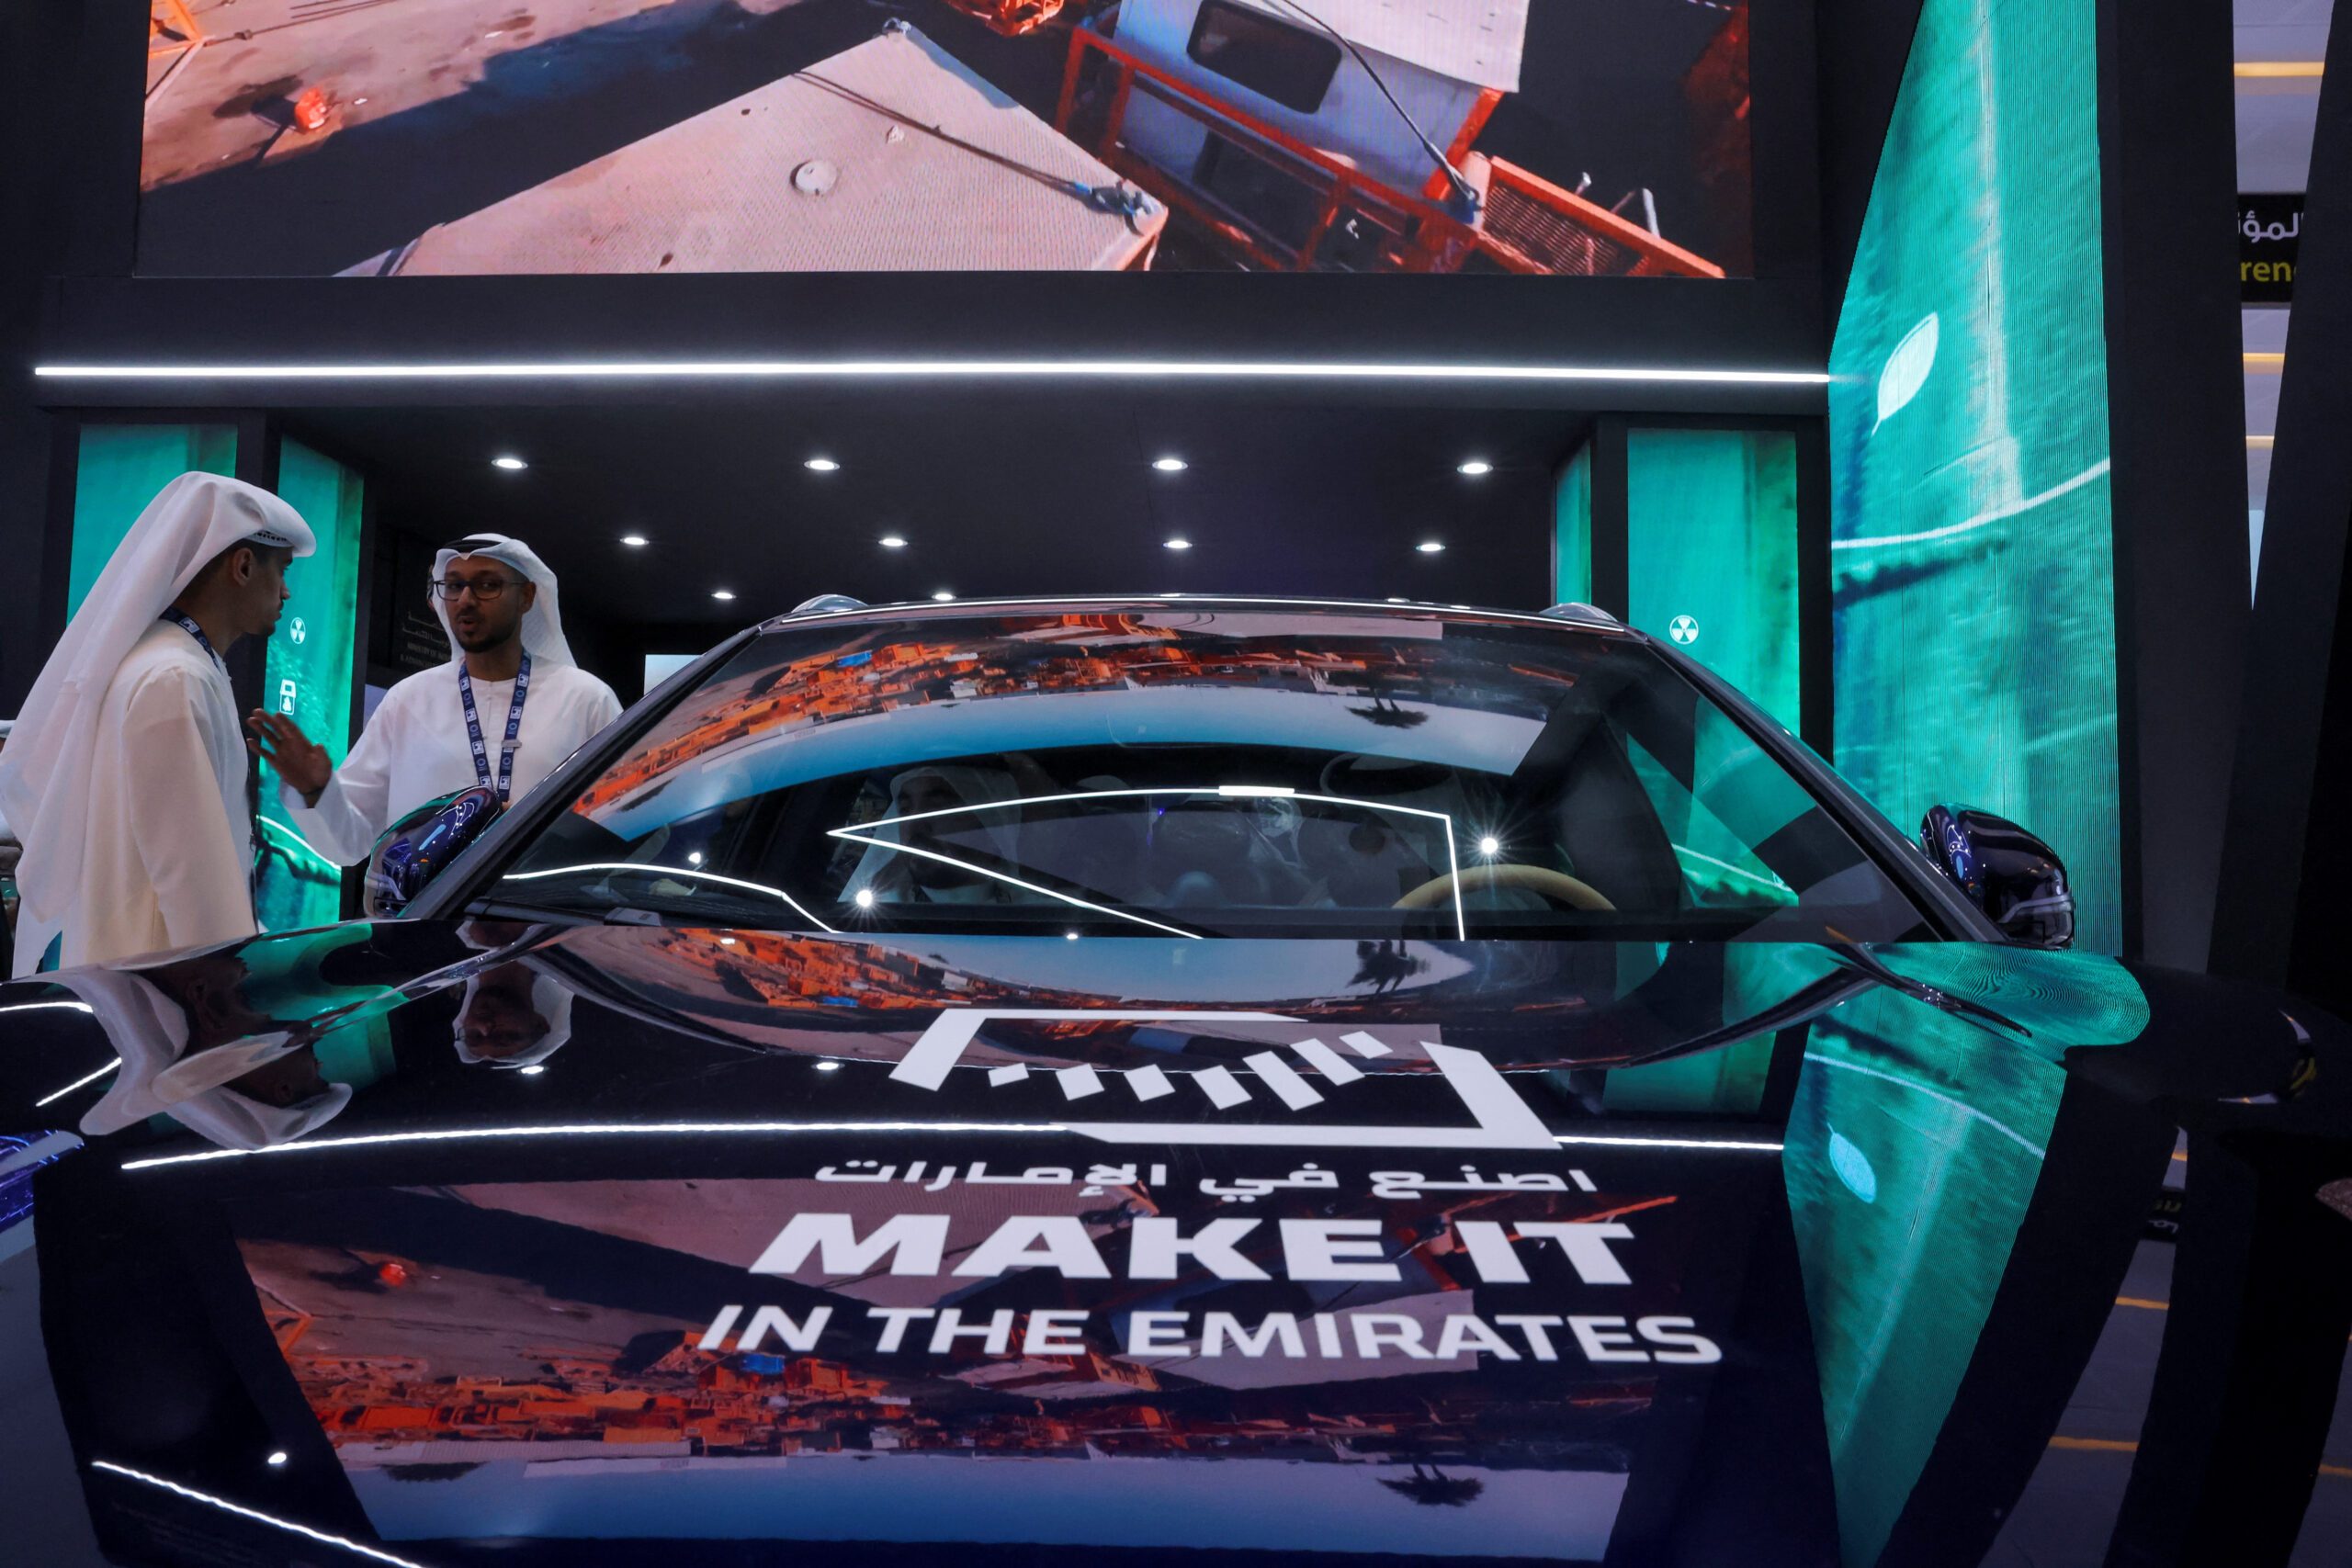 A Make It In The Emirates promotion at Adipec, where Adnoc announced its $17bn sour gas plan. It has also committed to billions of dollars of local procurement by 2027 under the scheme